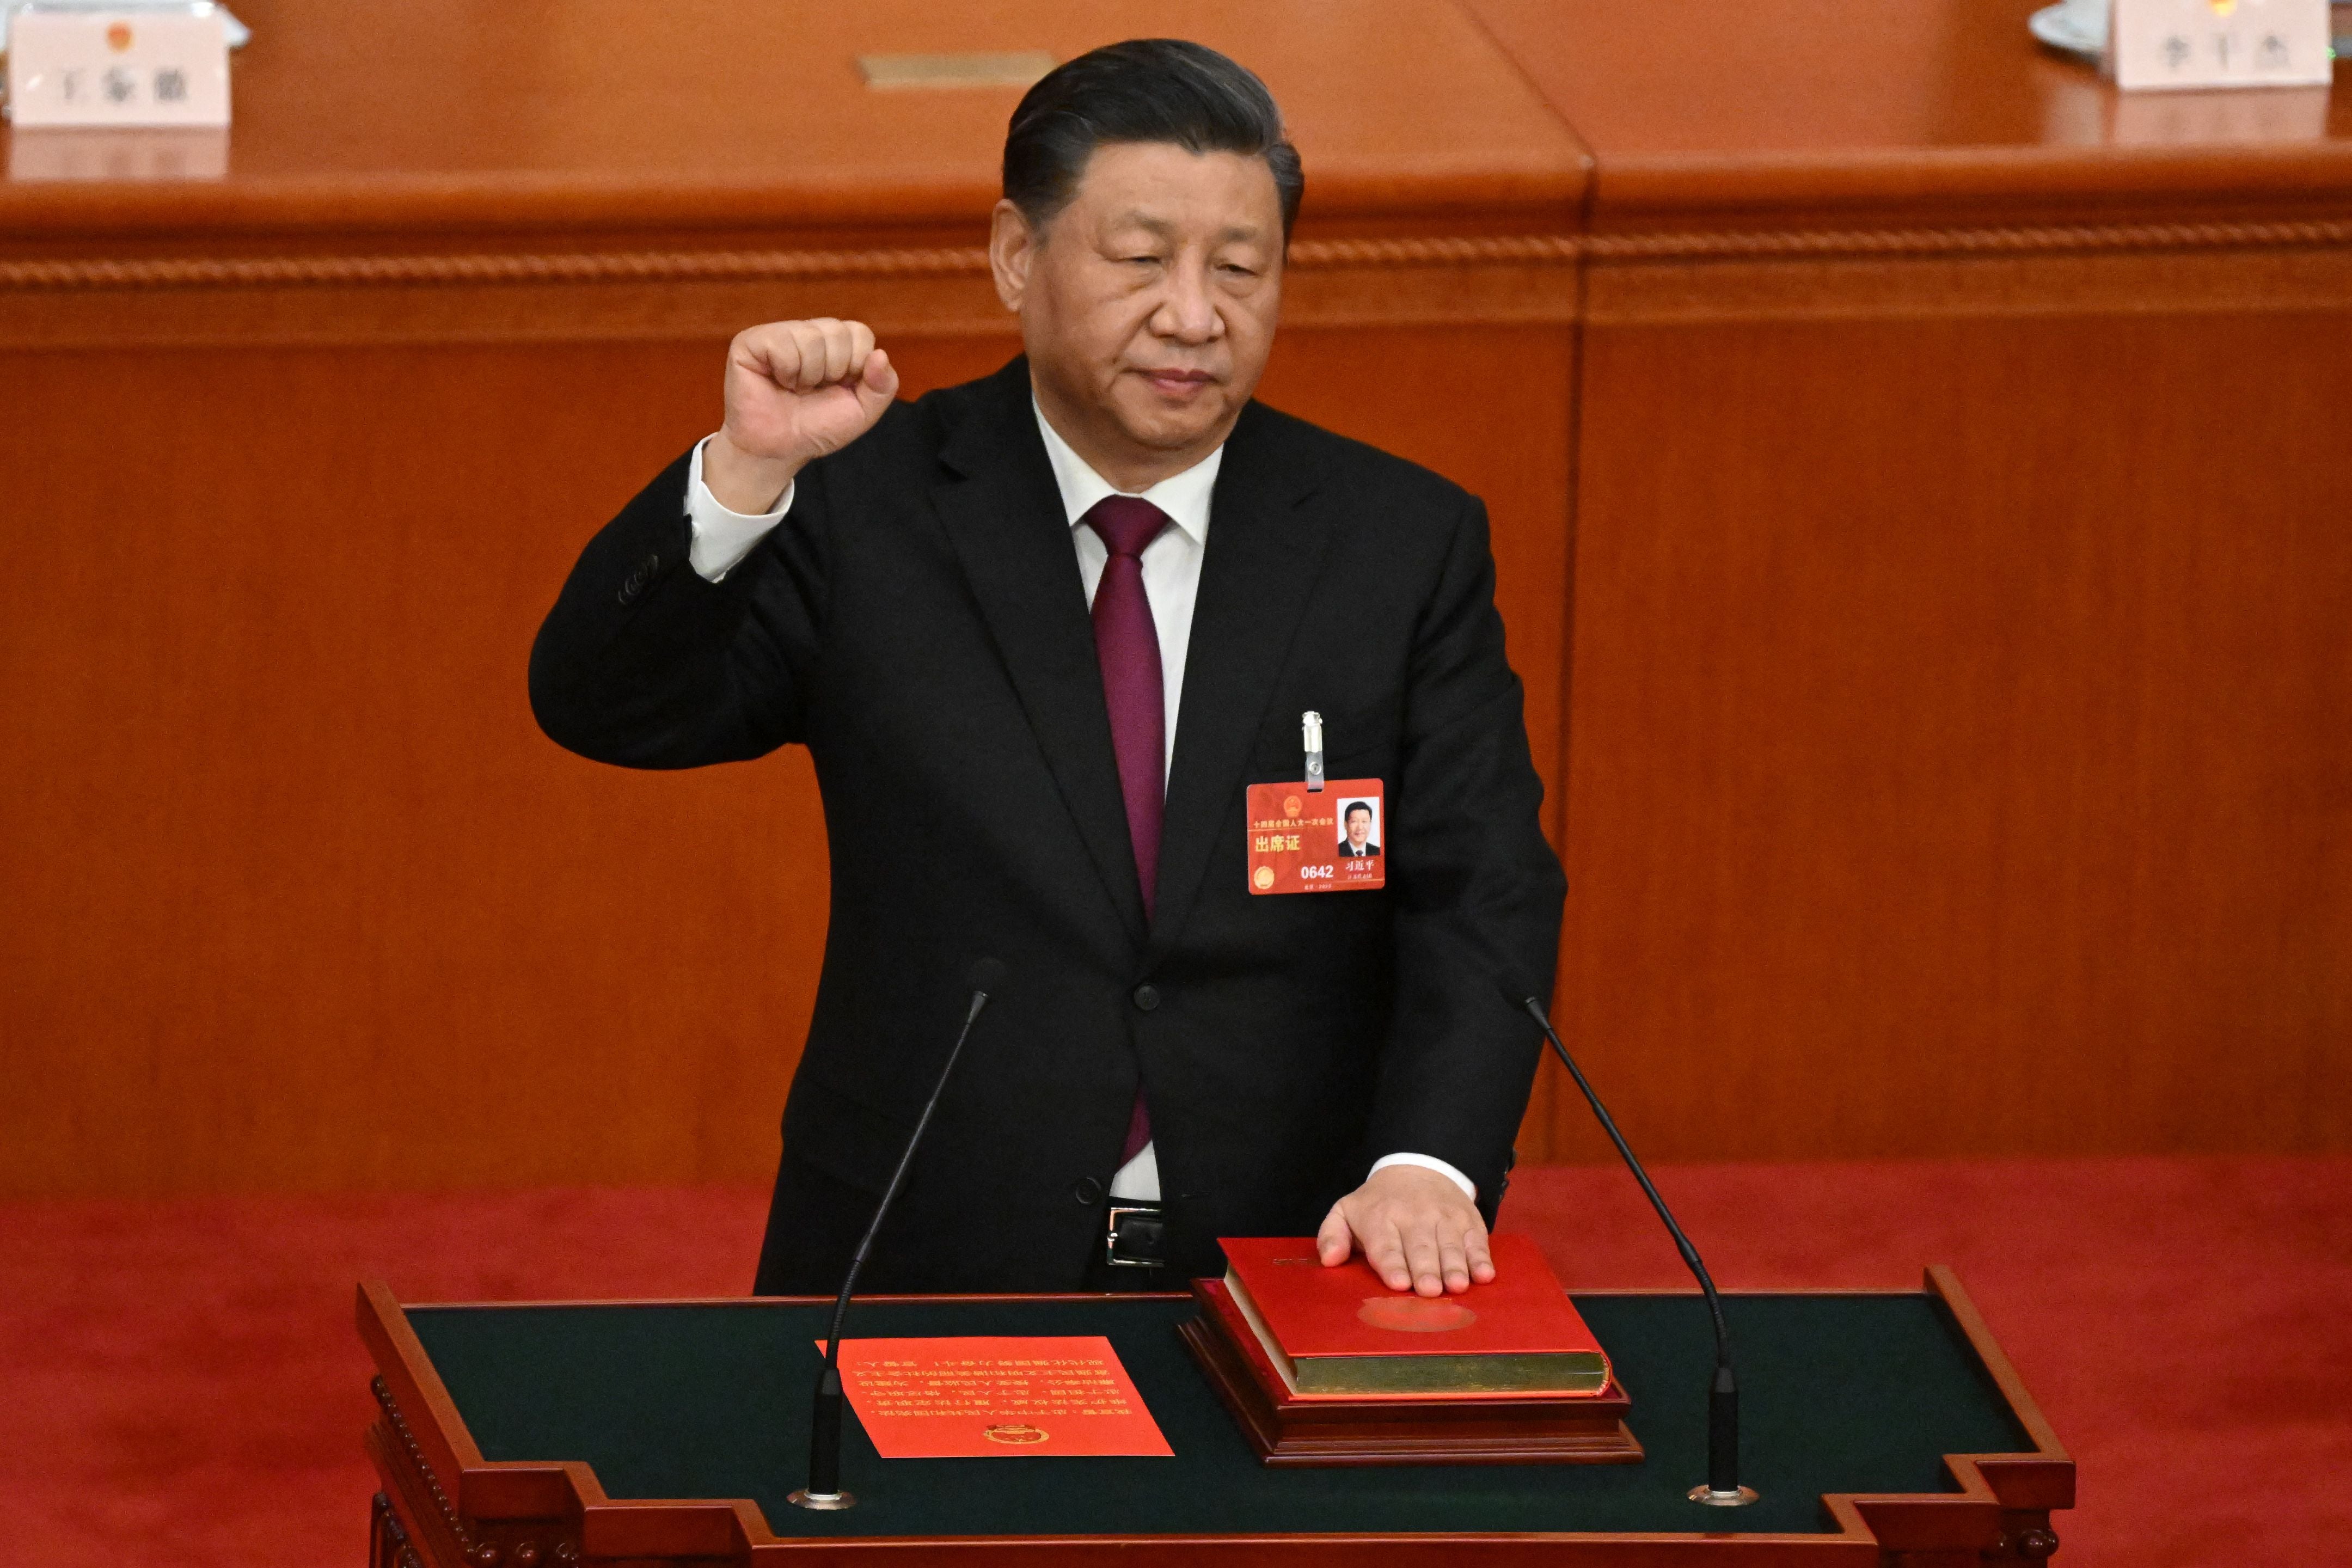 China's President Xi Jinping swears under oath after being re-elected